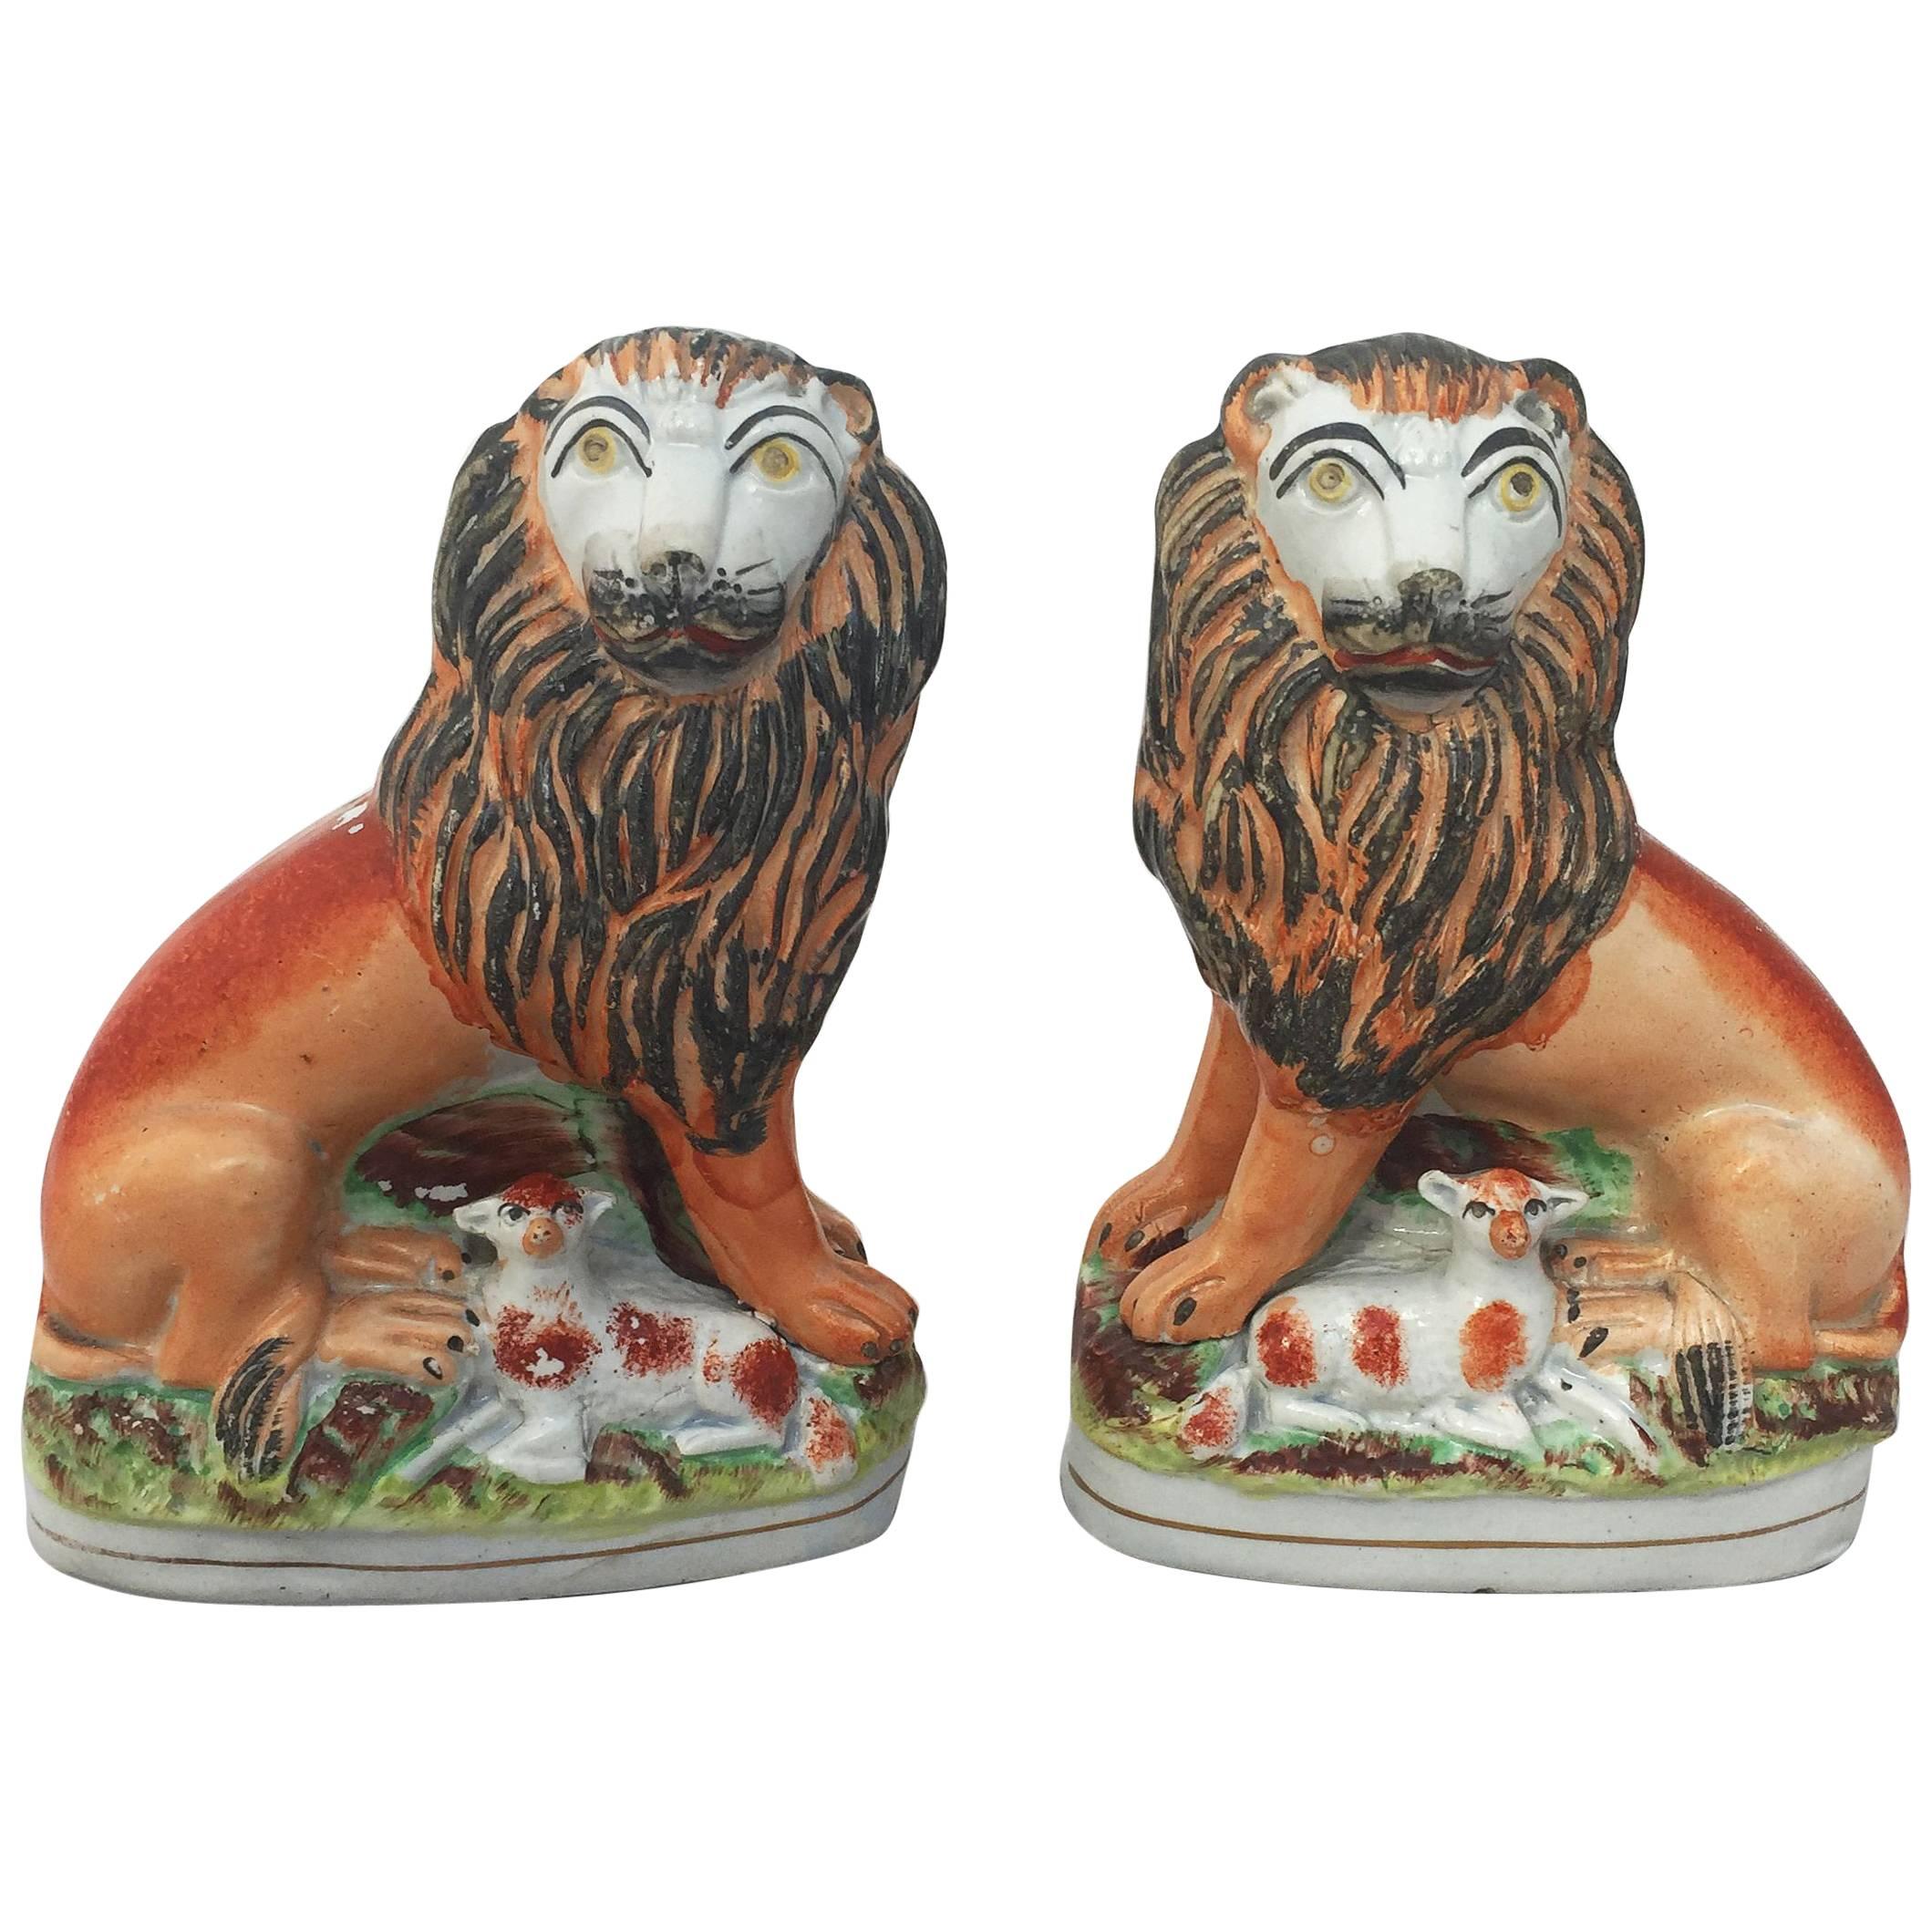 Pair of 19th Century English Staffordshire Lions with Lambs